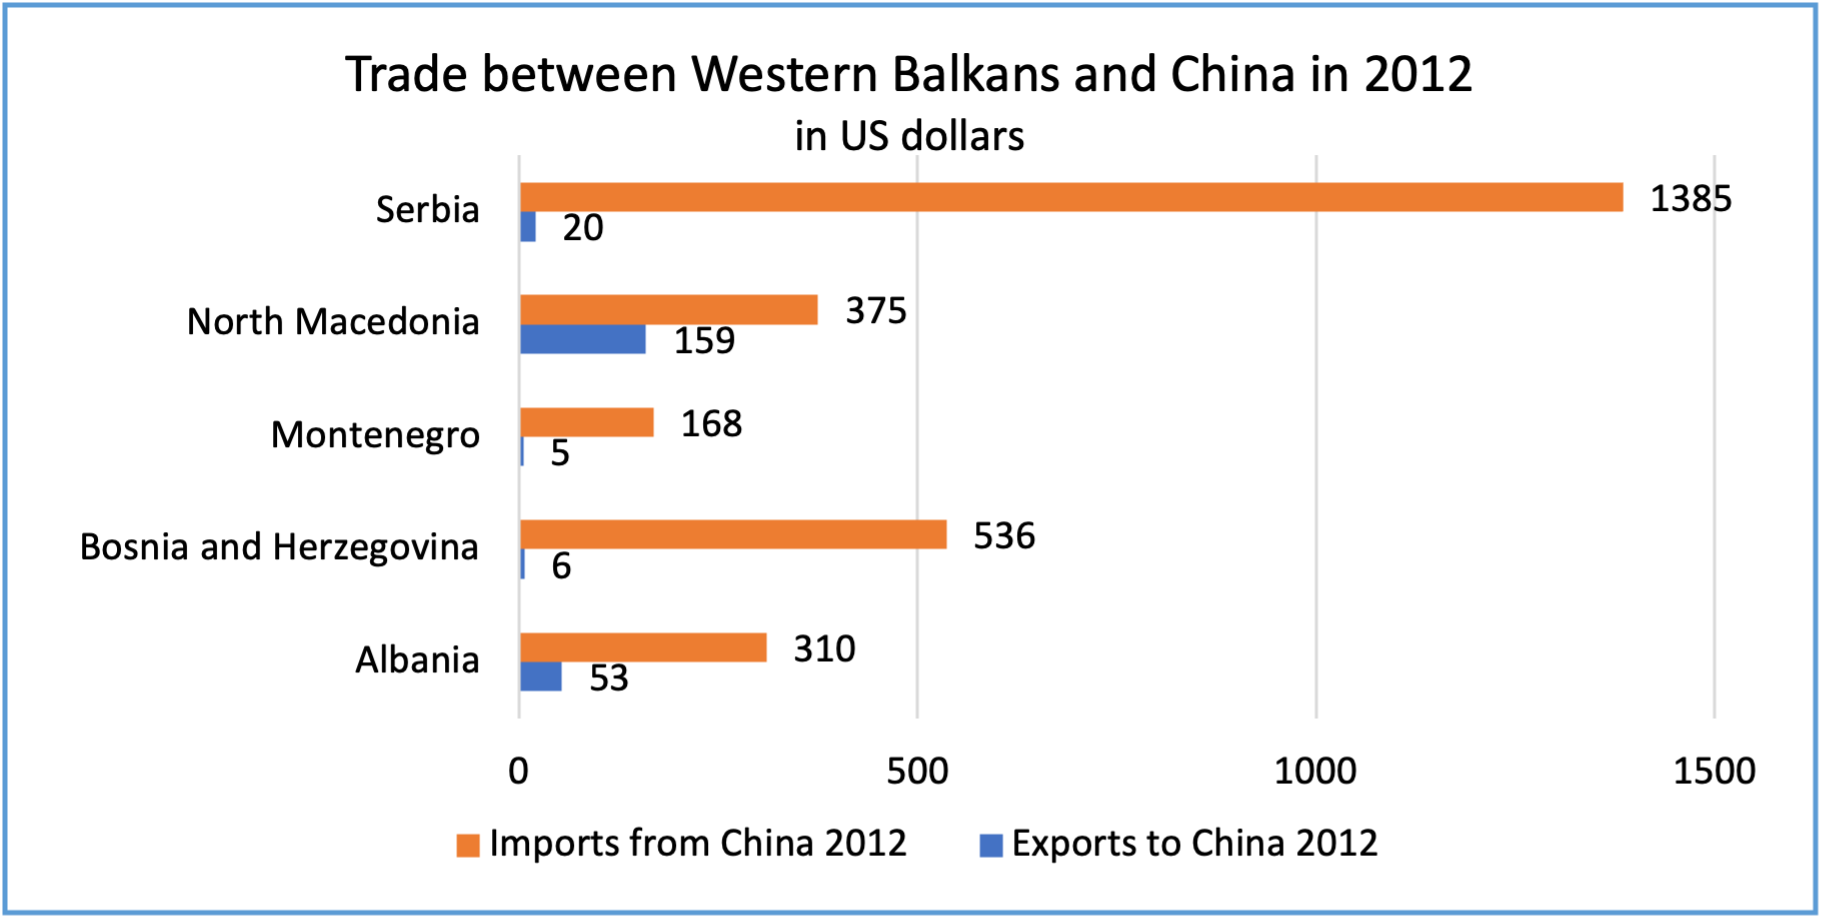 Trade levels between China and Western Balkans 2012, in million US dollars